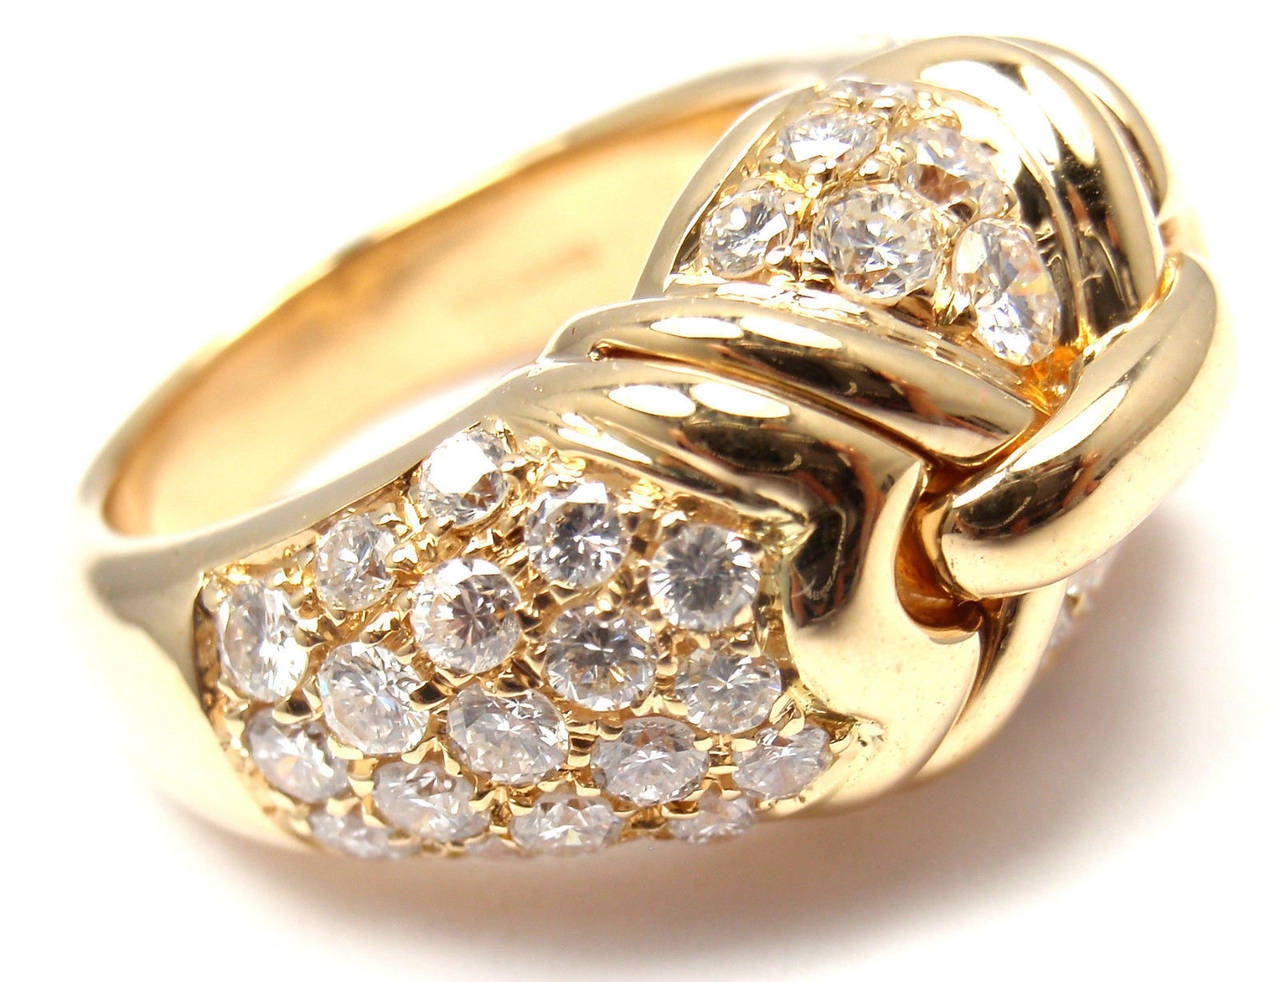 18k Yellow Gold Diamond Ring by Bulgari. 
With 50 Diamonds approximately weighing 2cts With G Color And VS1 Clarity

Details: 
Ring Size: 6
Weight: 15.6 grams
Width: 13mm
Stamped Hallmarks: Bulgari, 750, 2337AL
*Free Shipping within the